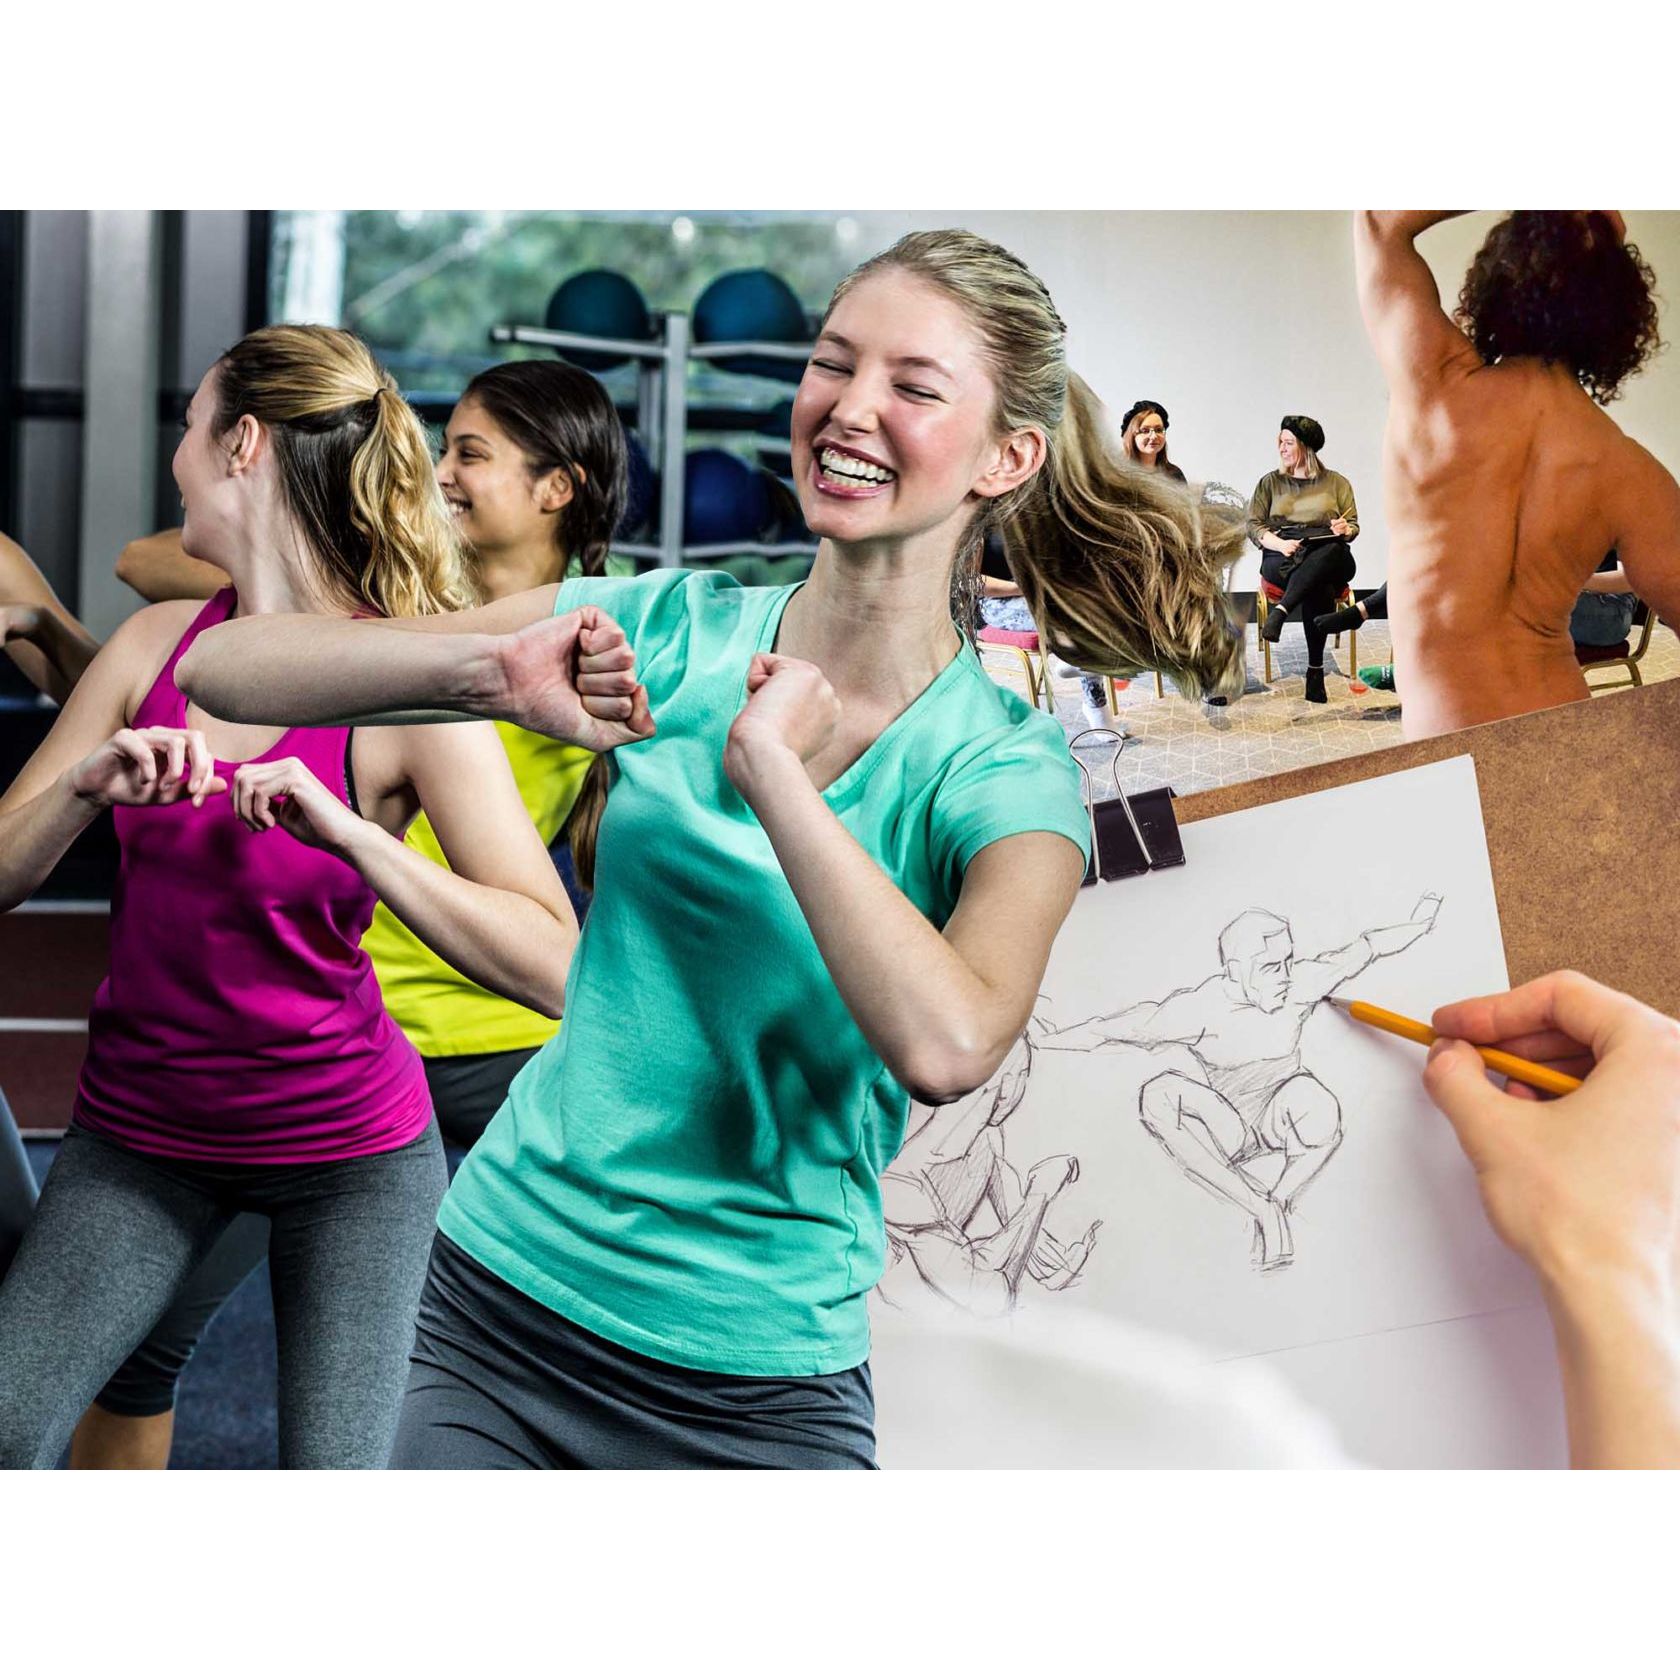 Life Drawing And Dance Class For Groups In Swansea